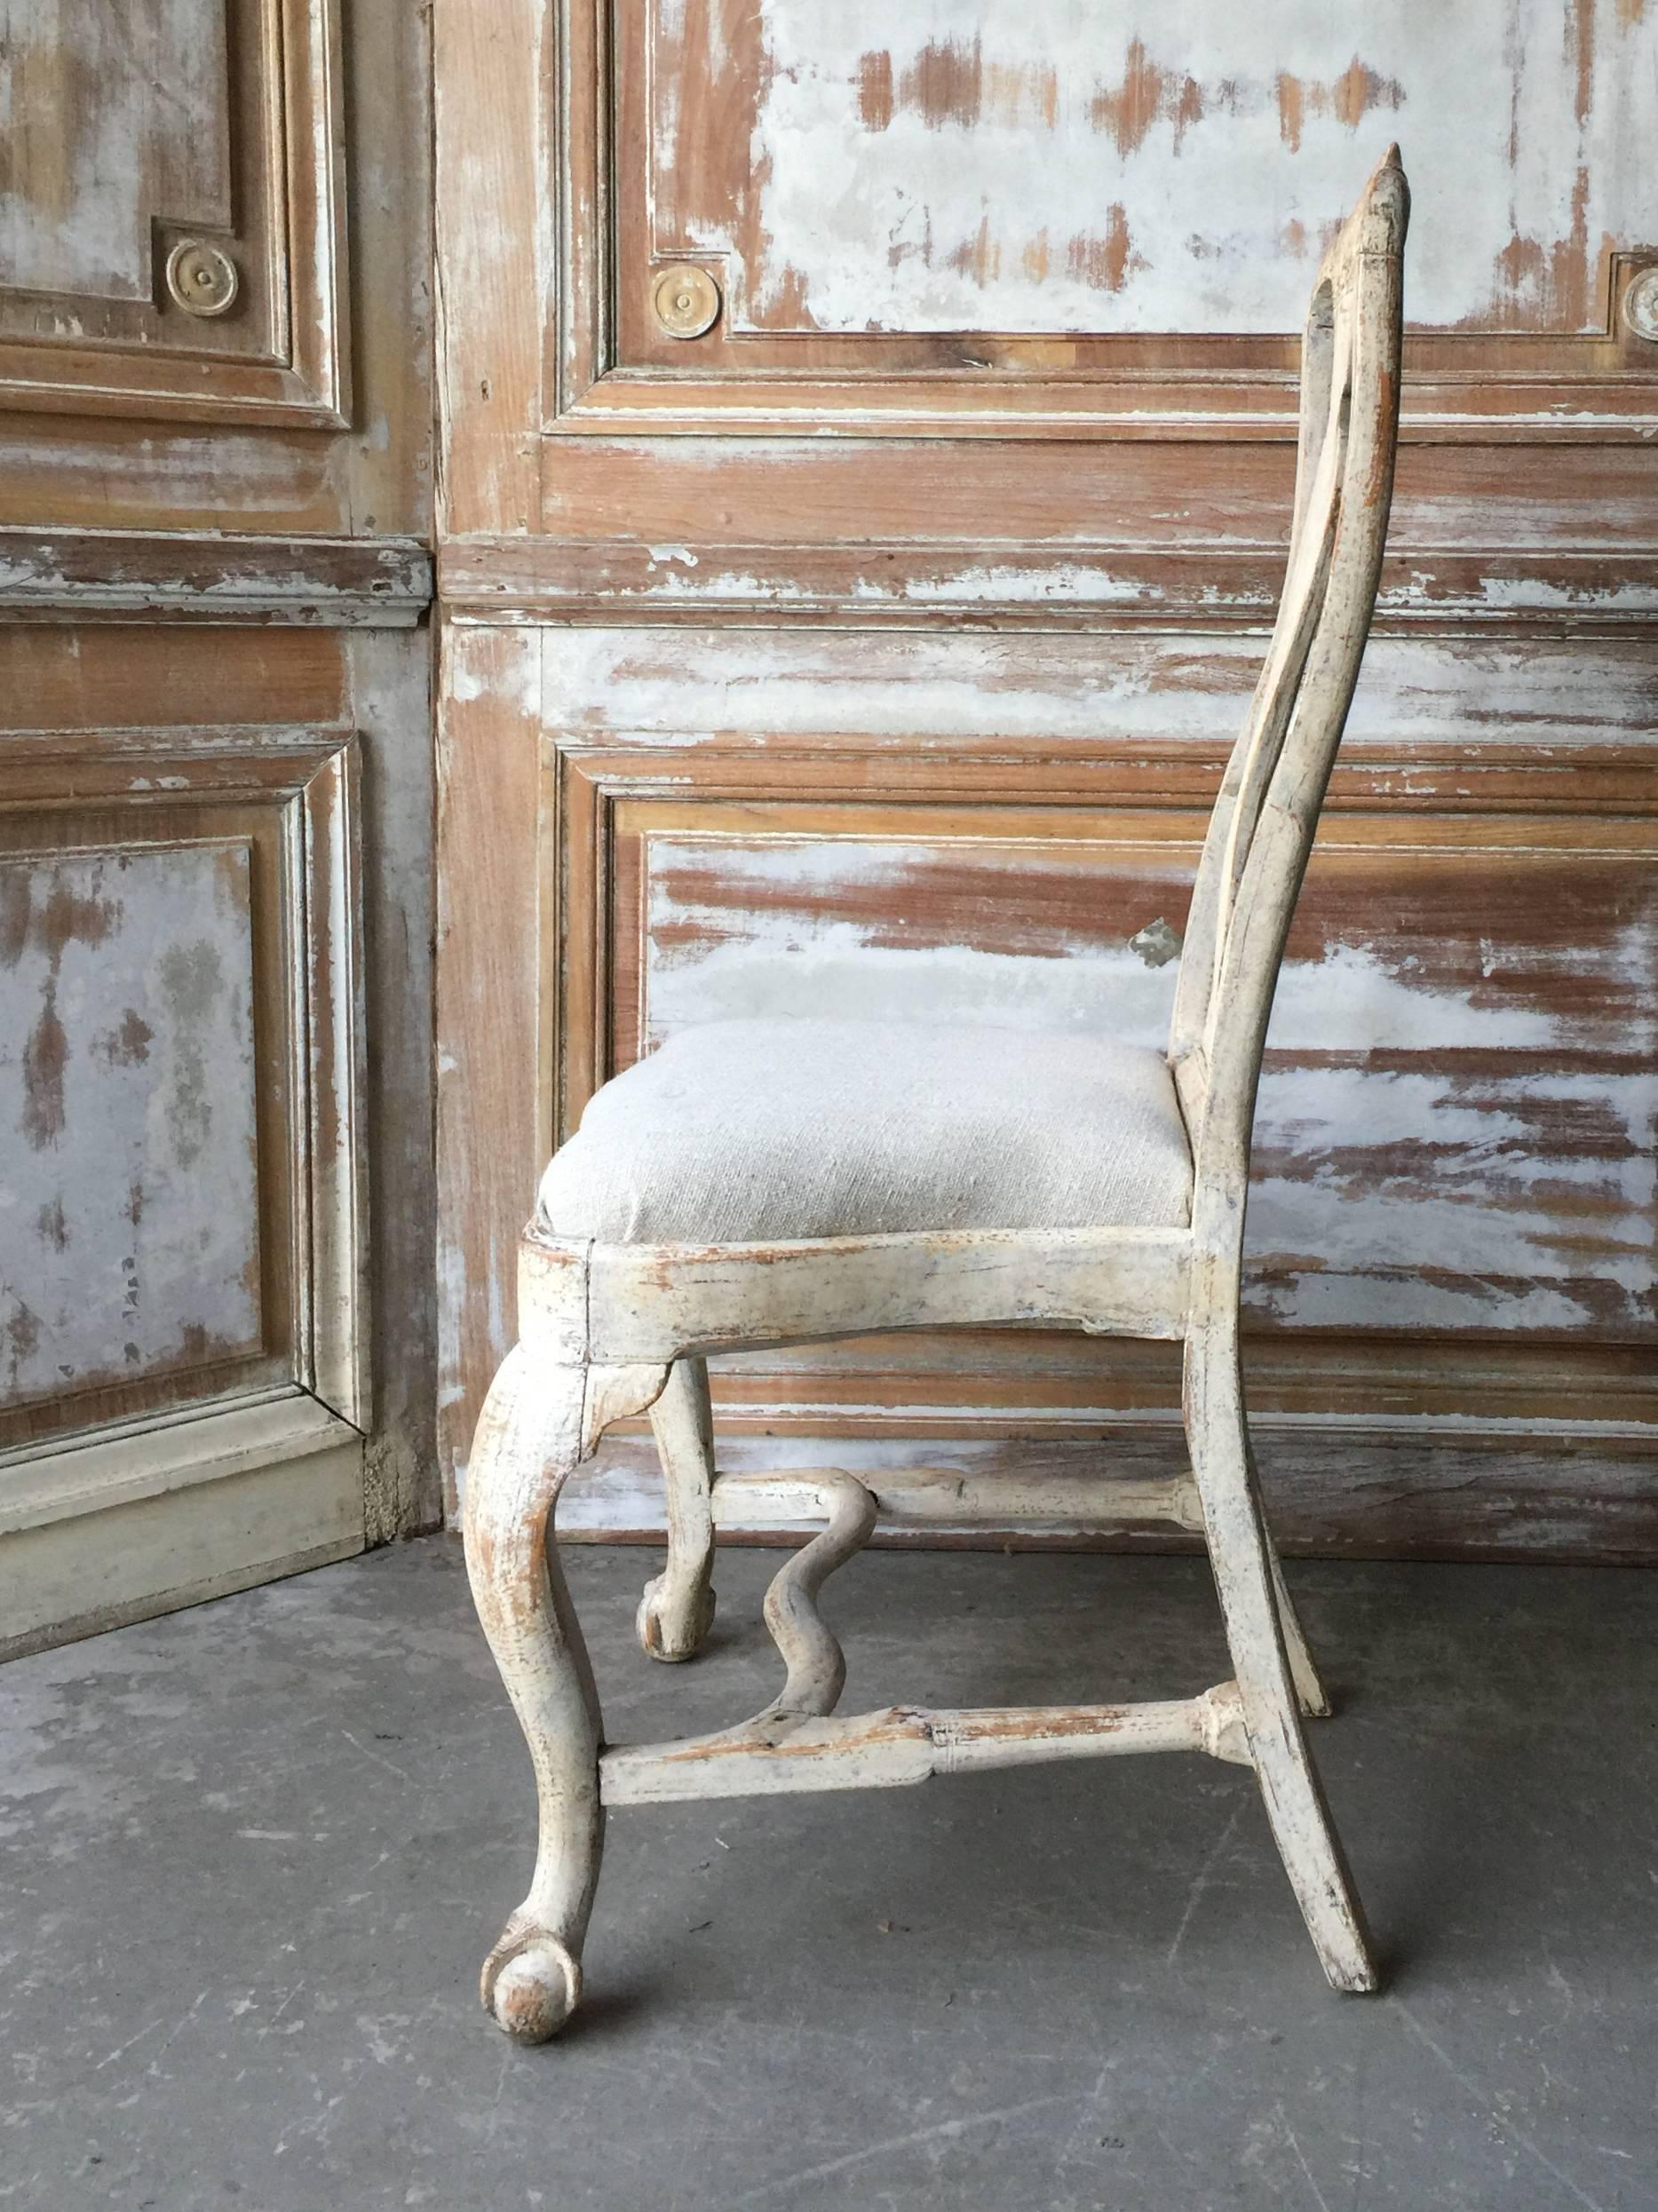 18th century Swedish chairs, in Rococo period circa 1760 with lovingly handmade rocaille carving on the seat rails and pierced splats. Hand scraped back to traces of their original worn cream paint, circa 1760, Göteborg, Sweden. Measures: Seat 14